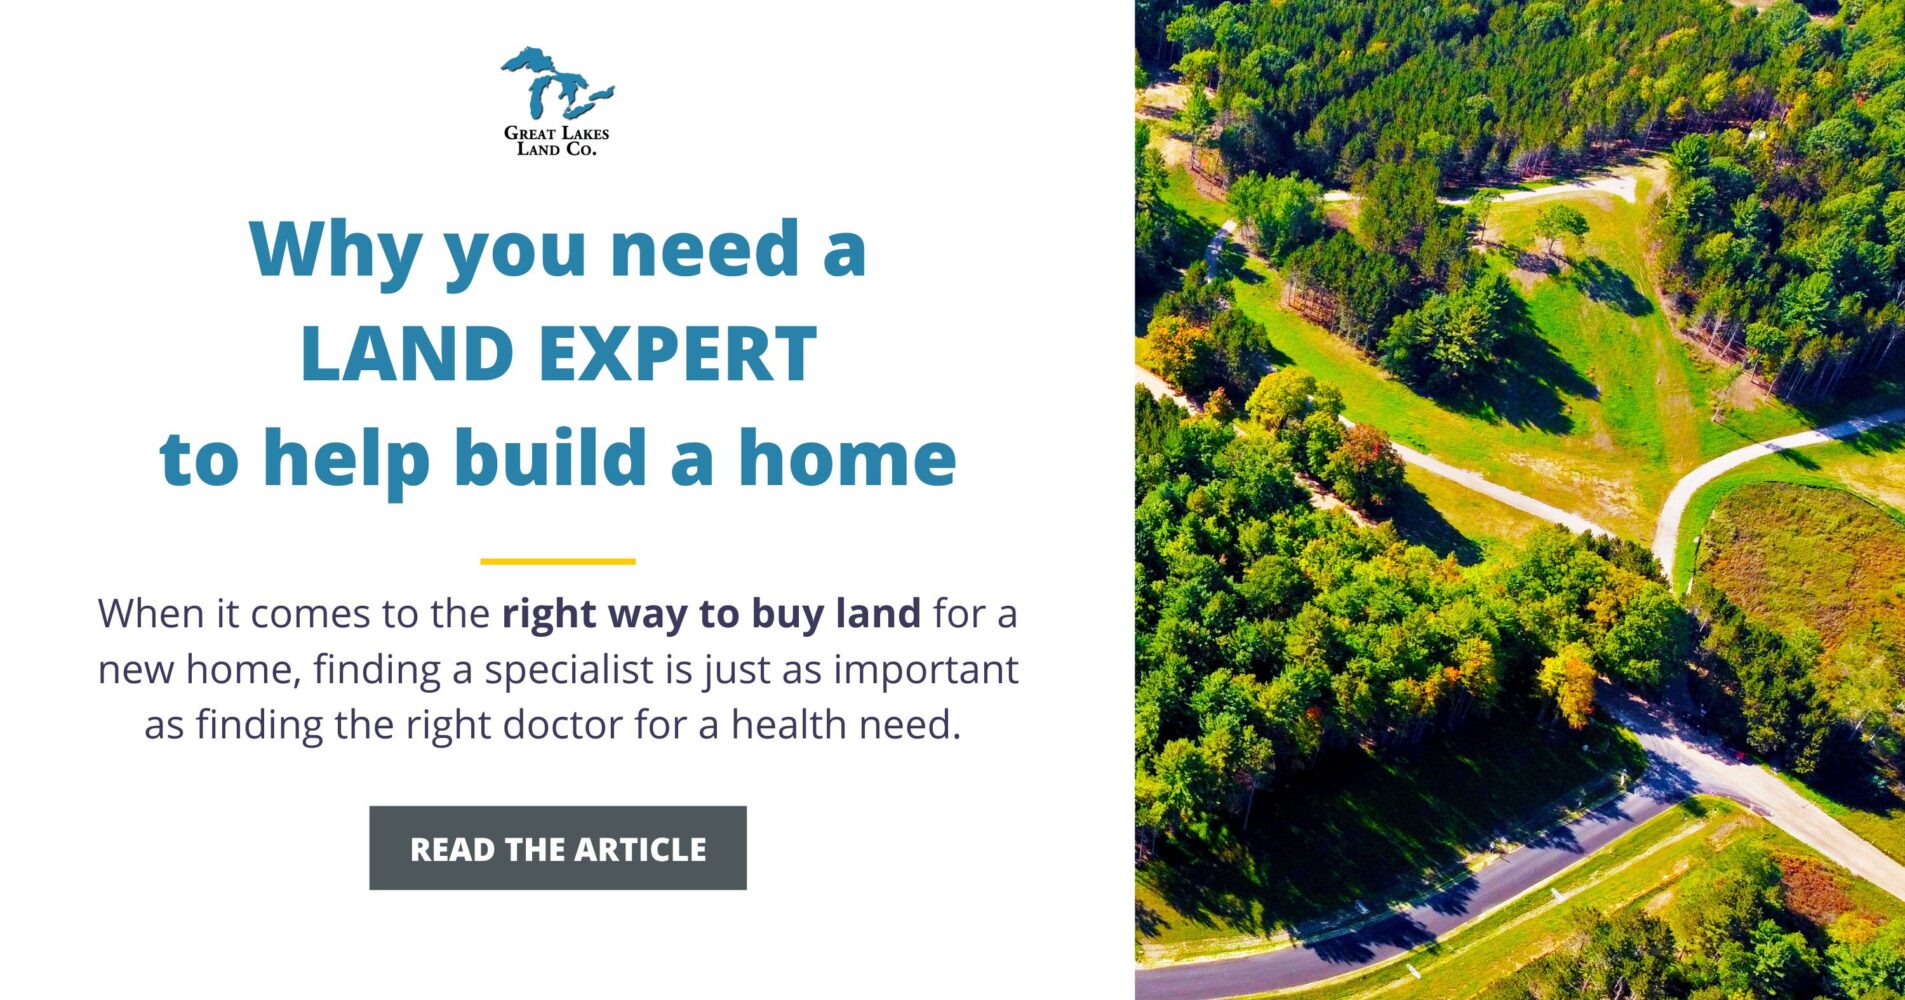 Why you need a land expert to help build a home.